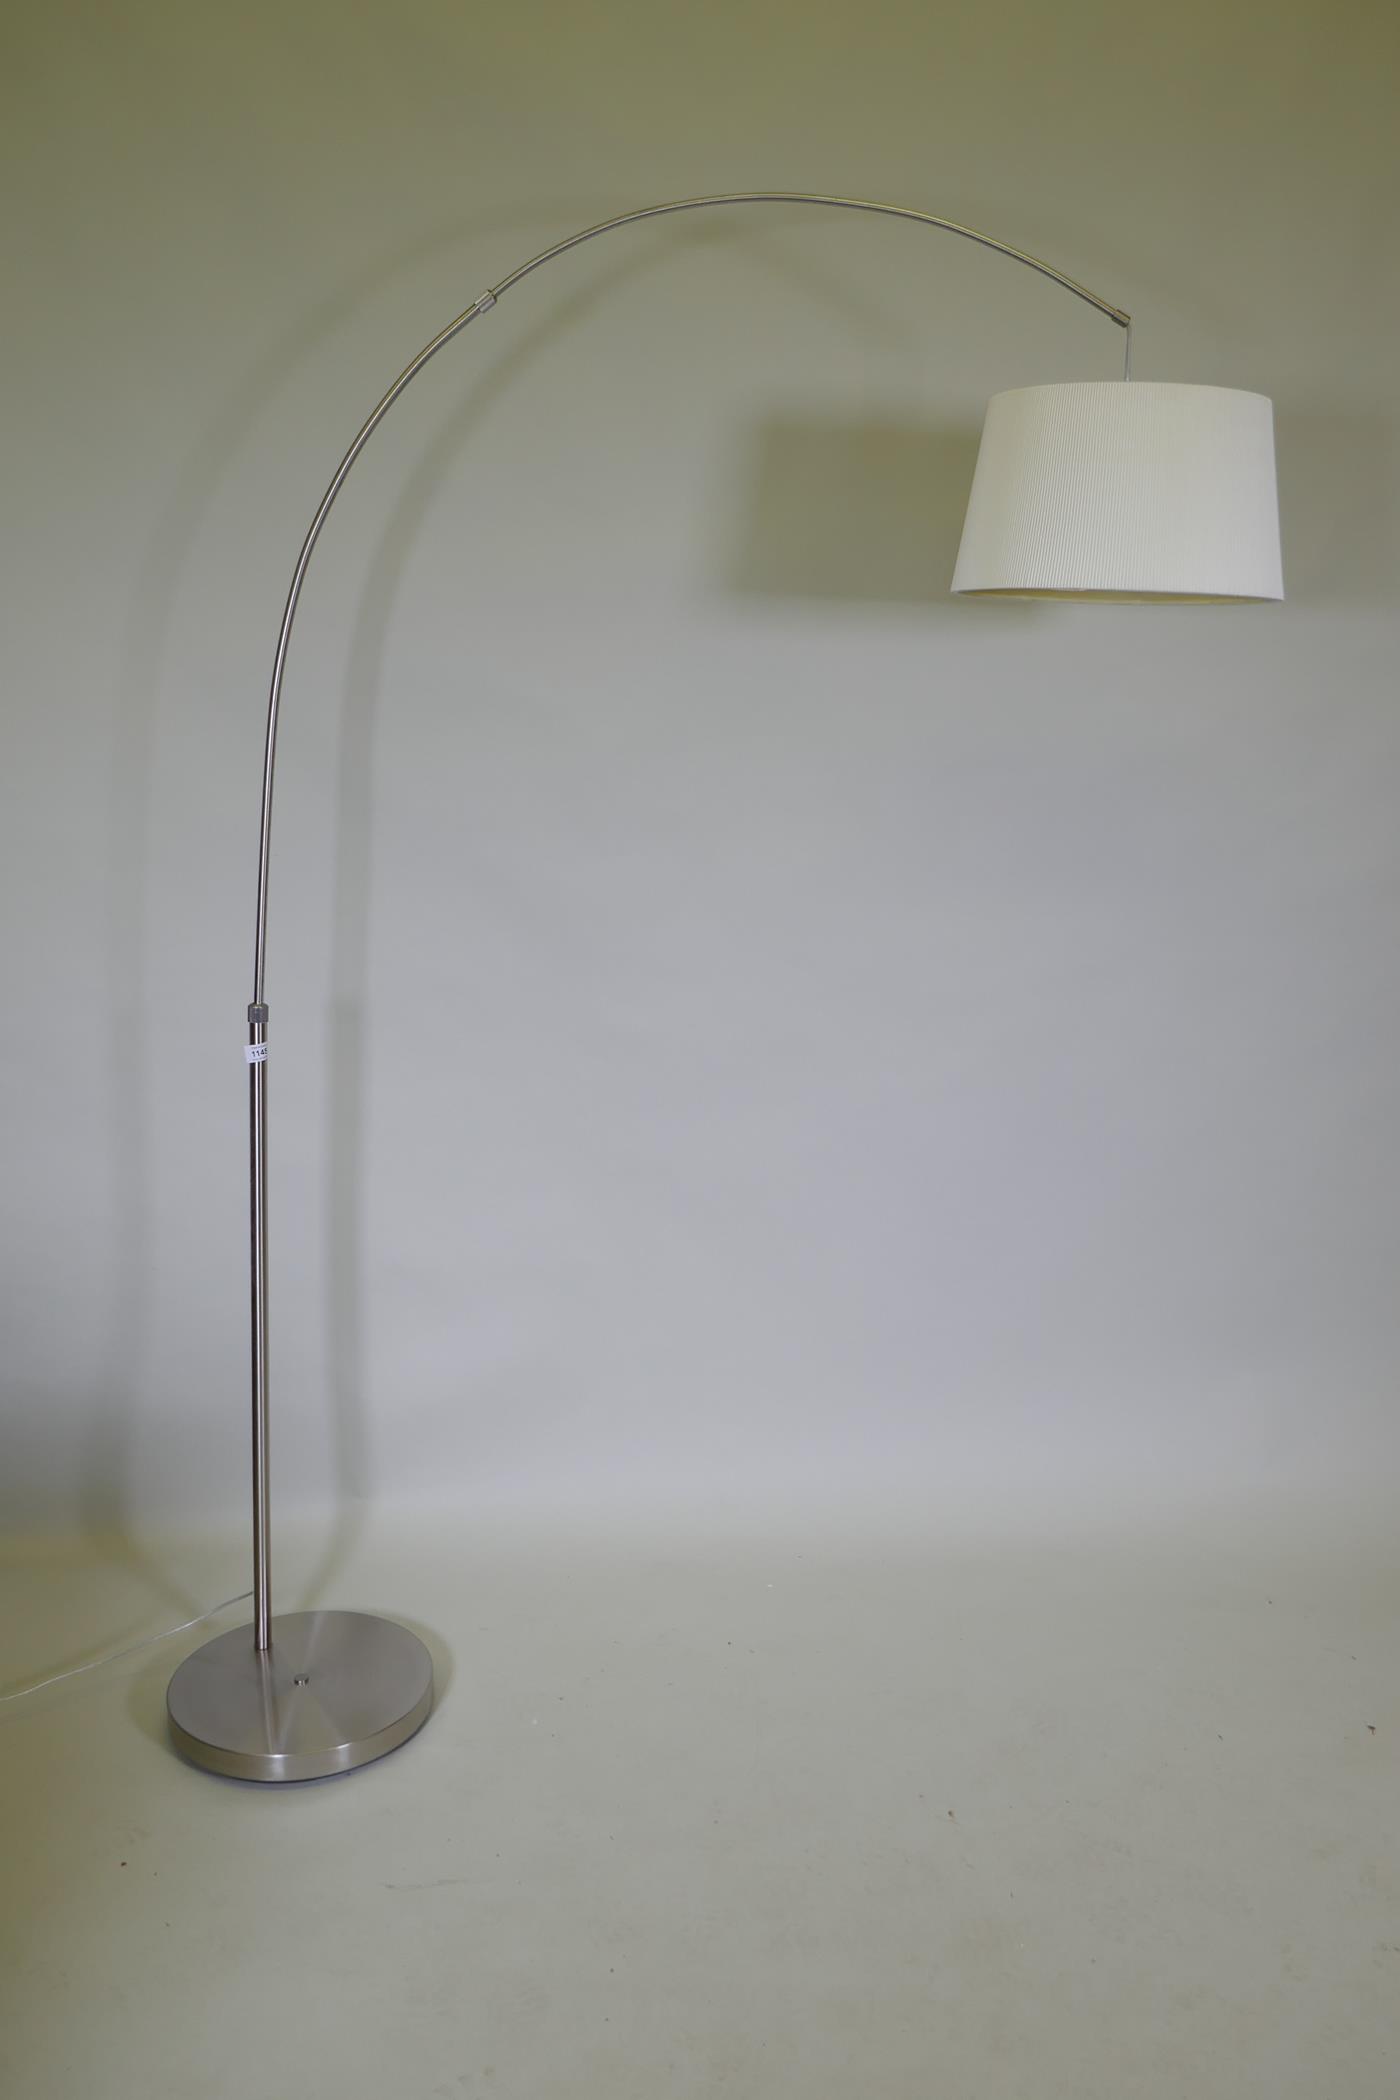 A contemporary brushed steel floor lamp, 180cm high